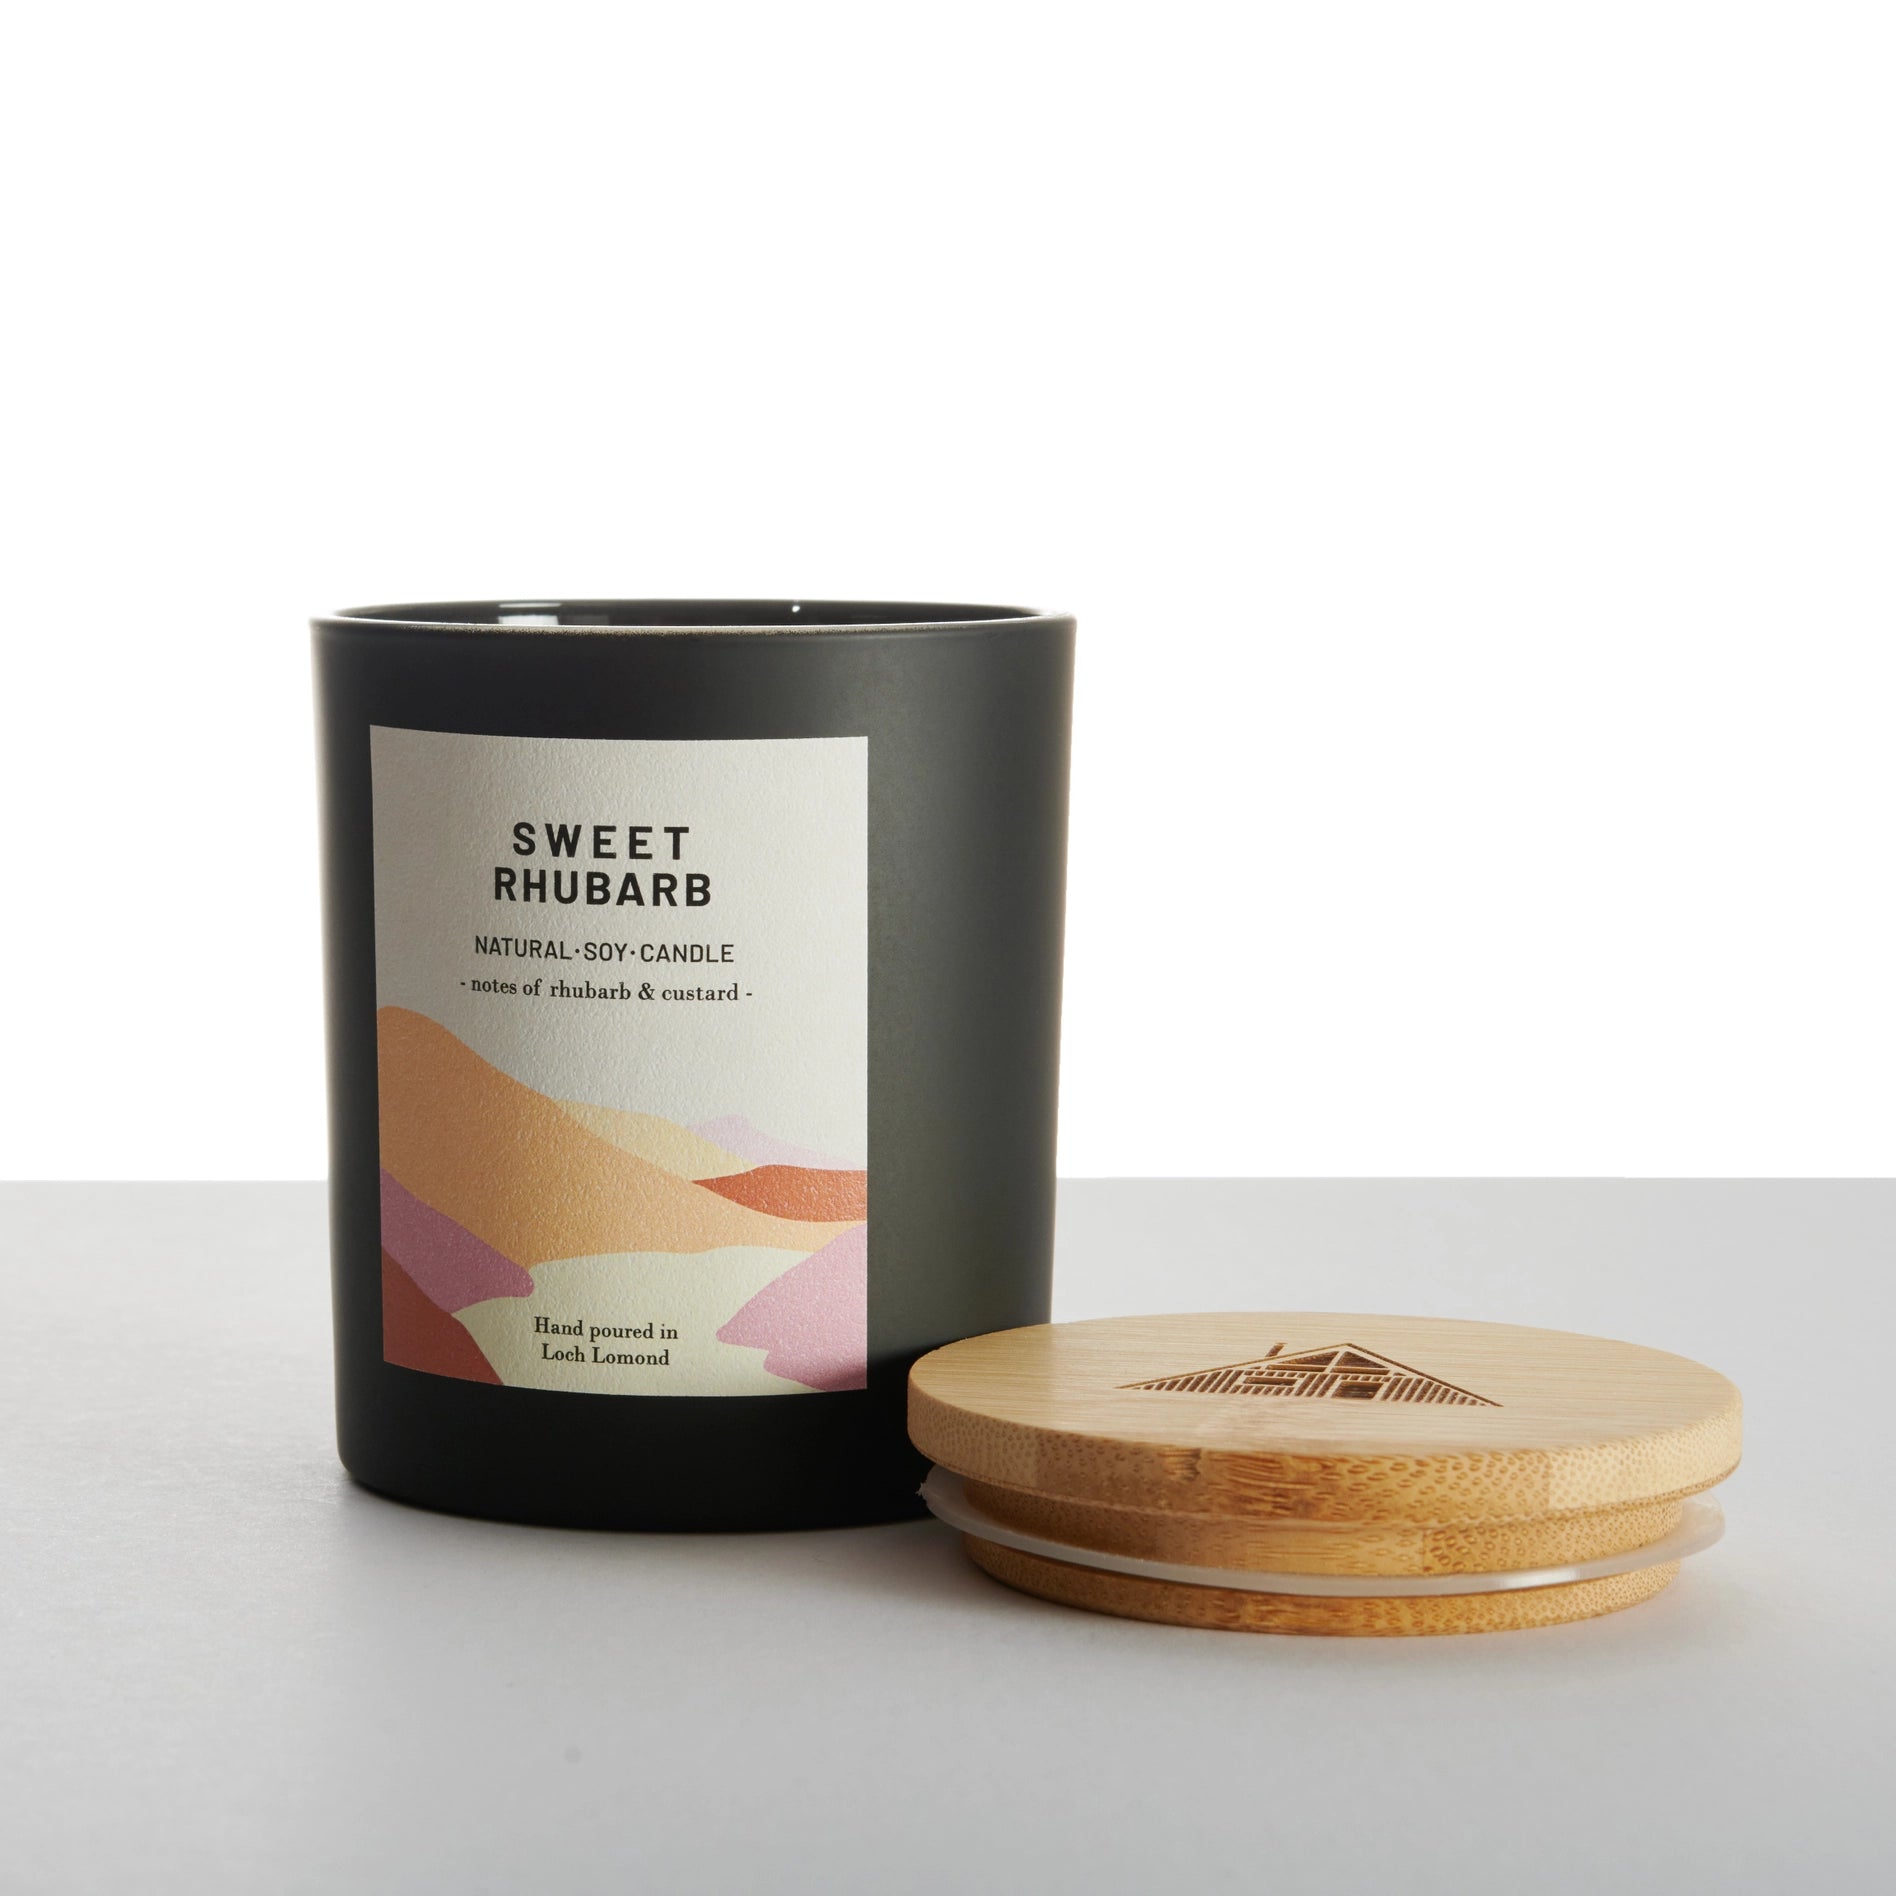 Sweet Rhubarb scented candle against a white background